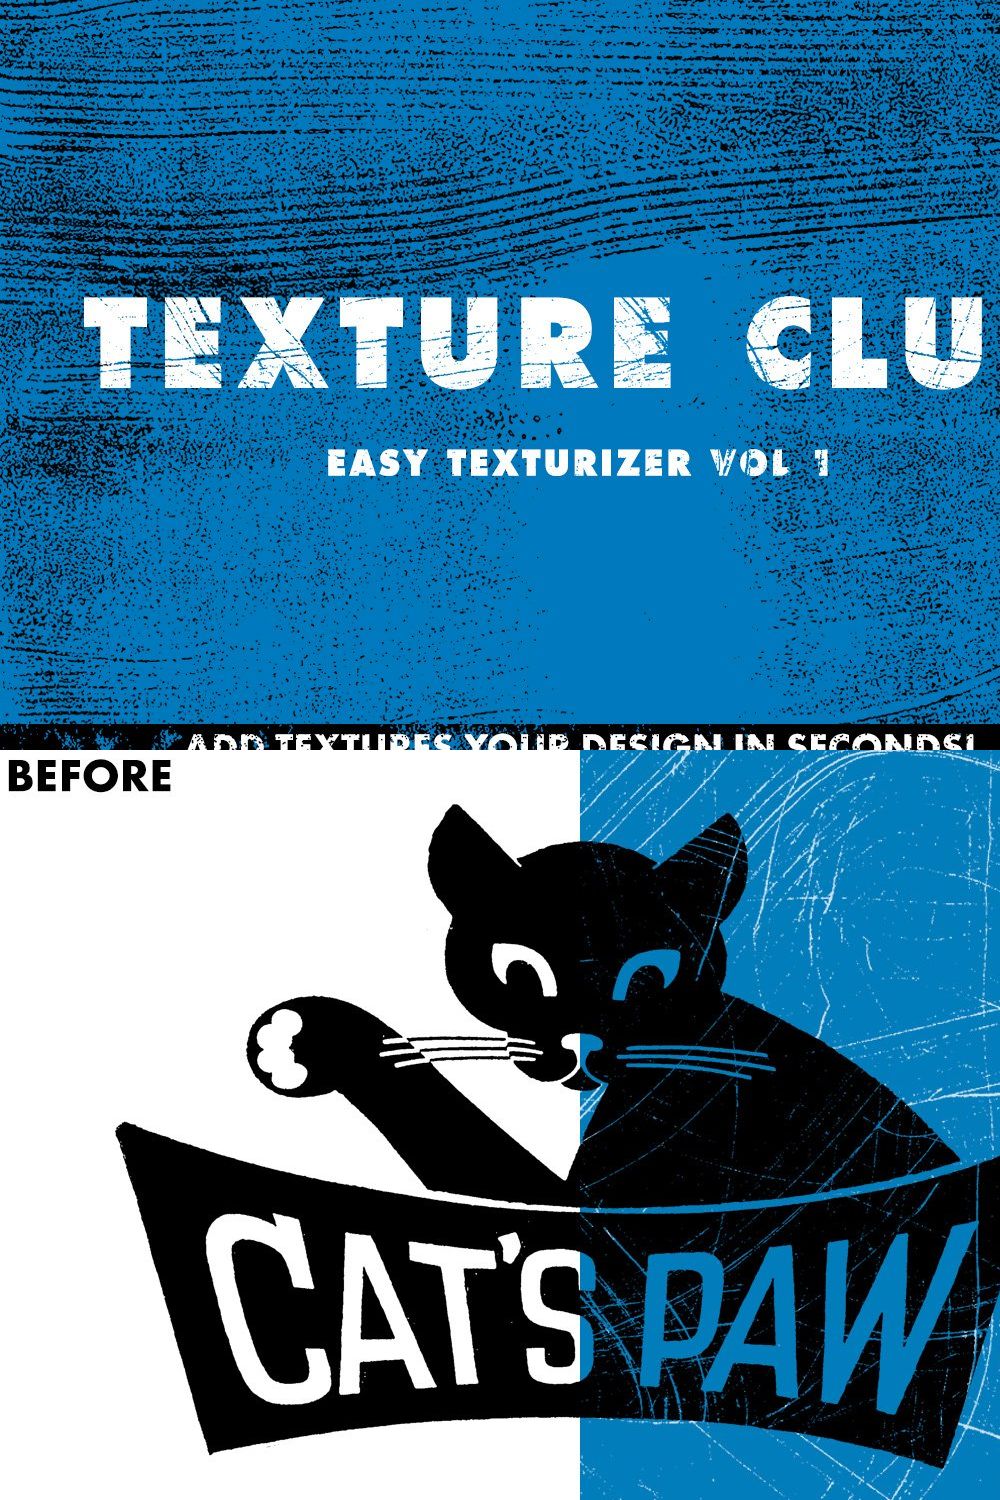 Easy Texturizer vol 1 pinterest preview image.